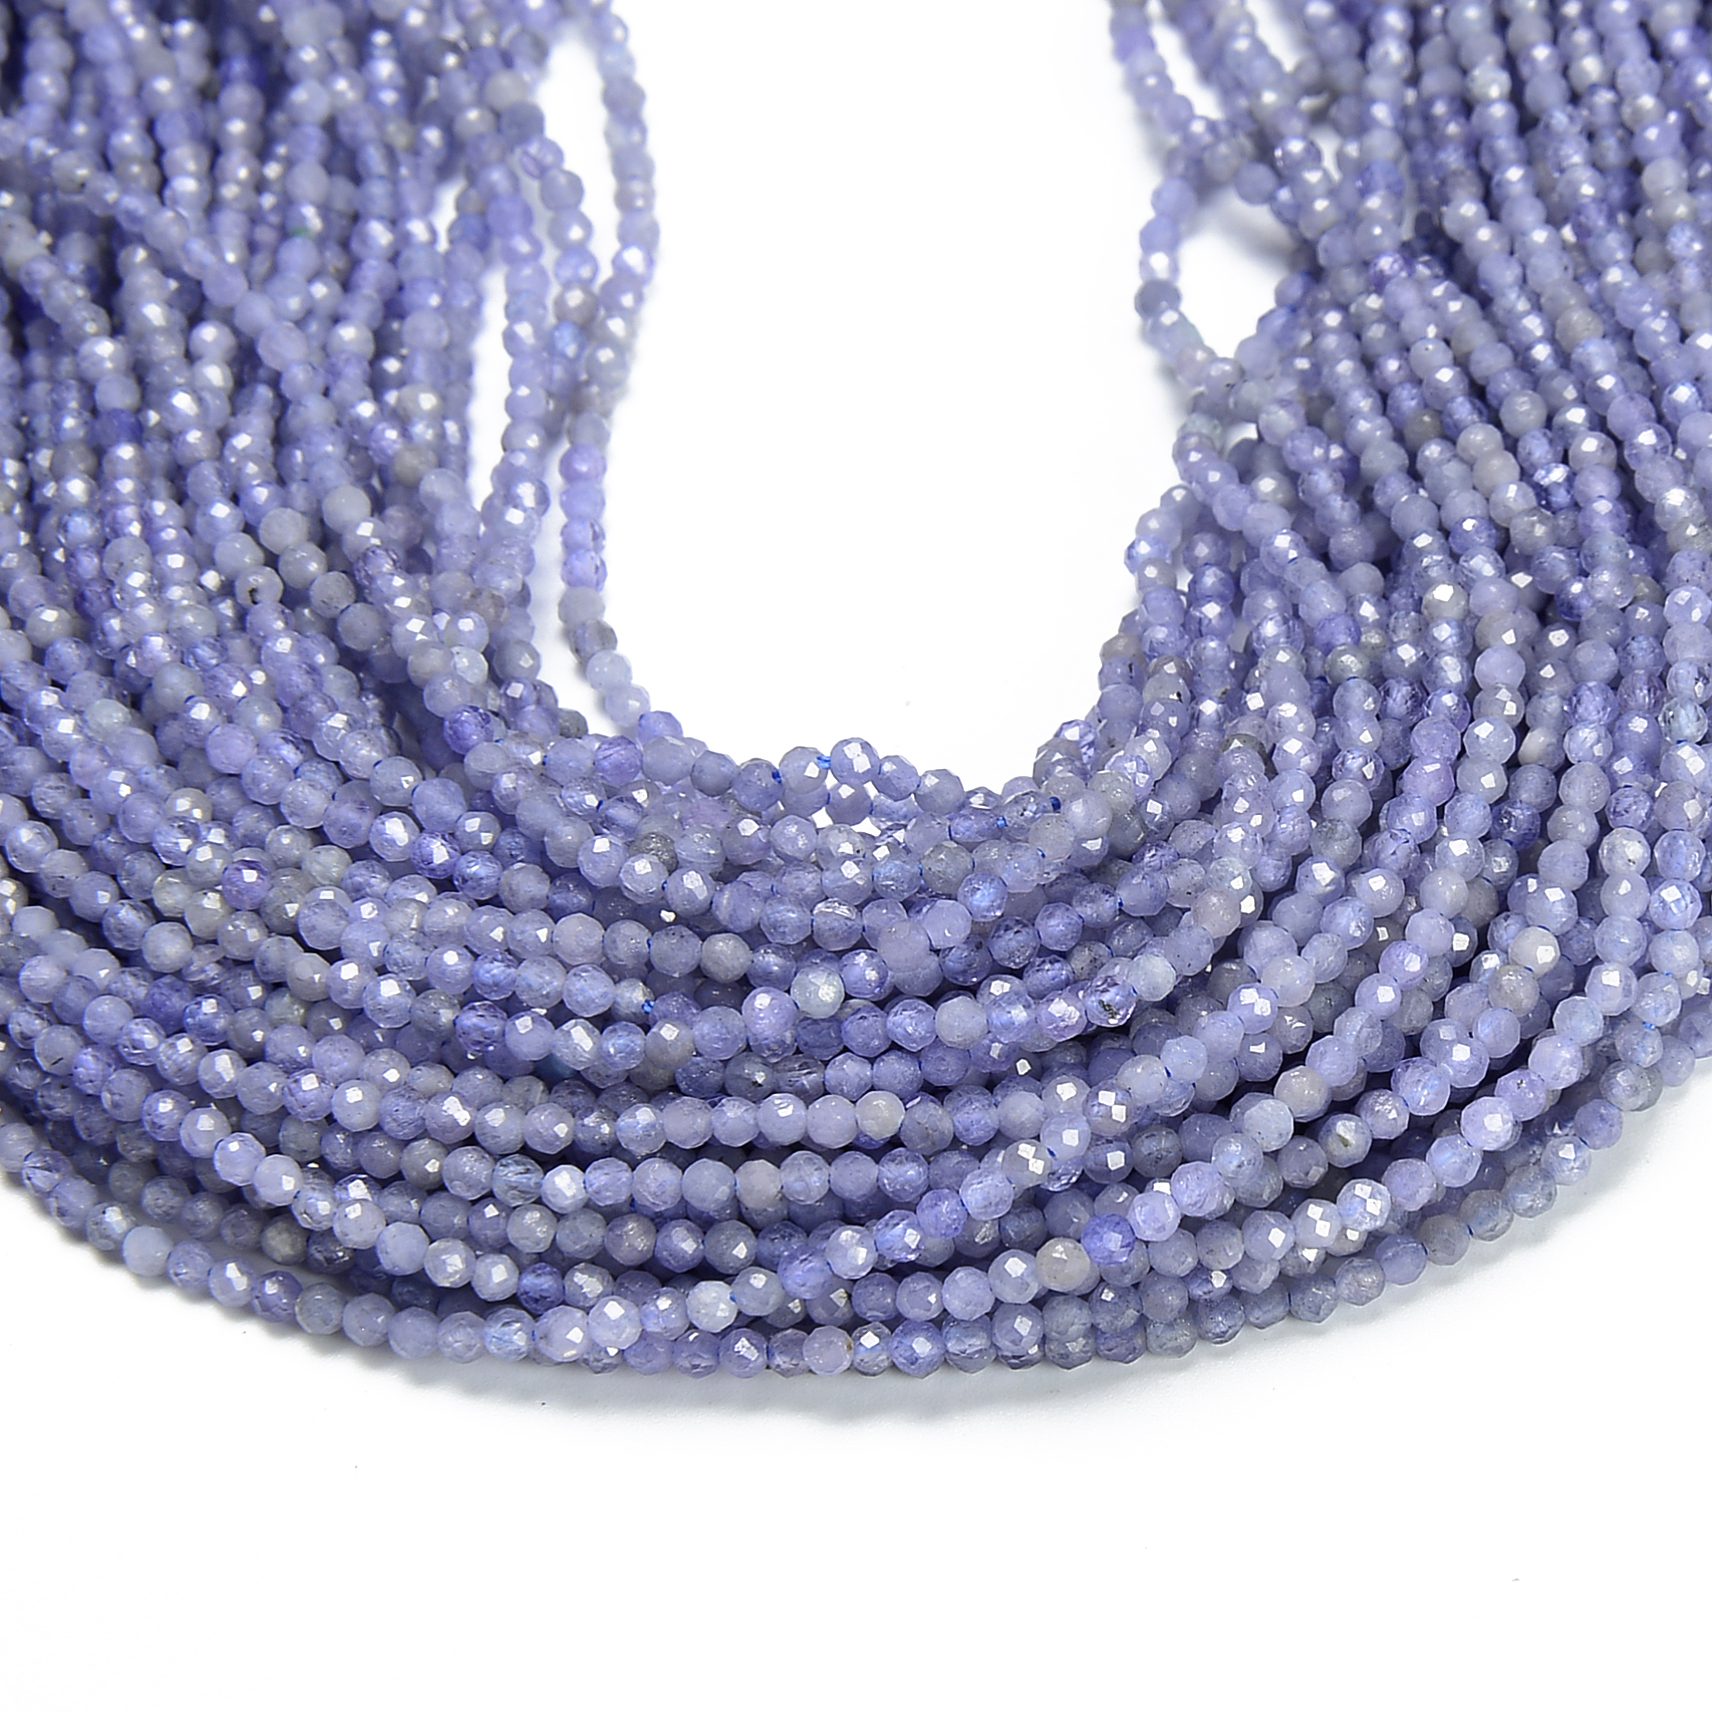 Natural Tanzanite Semi Precious Gemstone Faceted Loose Beads 13inch Strand Tanzanite Gemstone 2mm-3mm Rondelle Micro Faceted Beads AAA